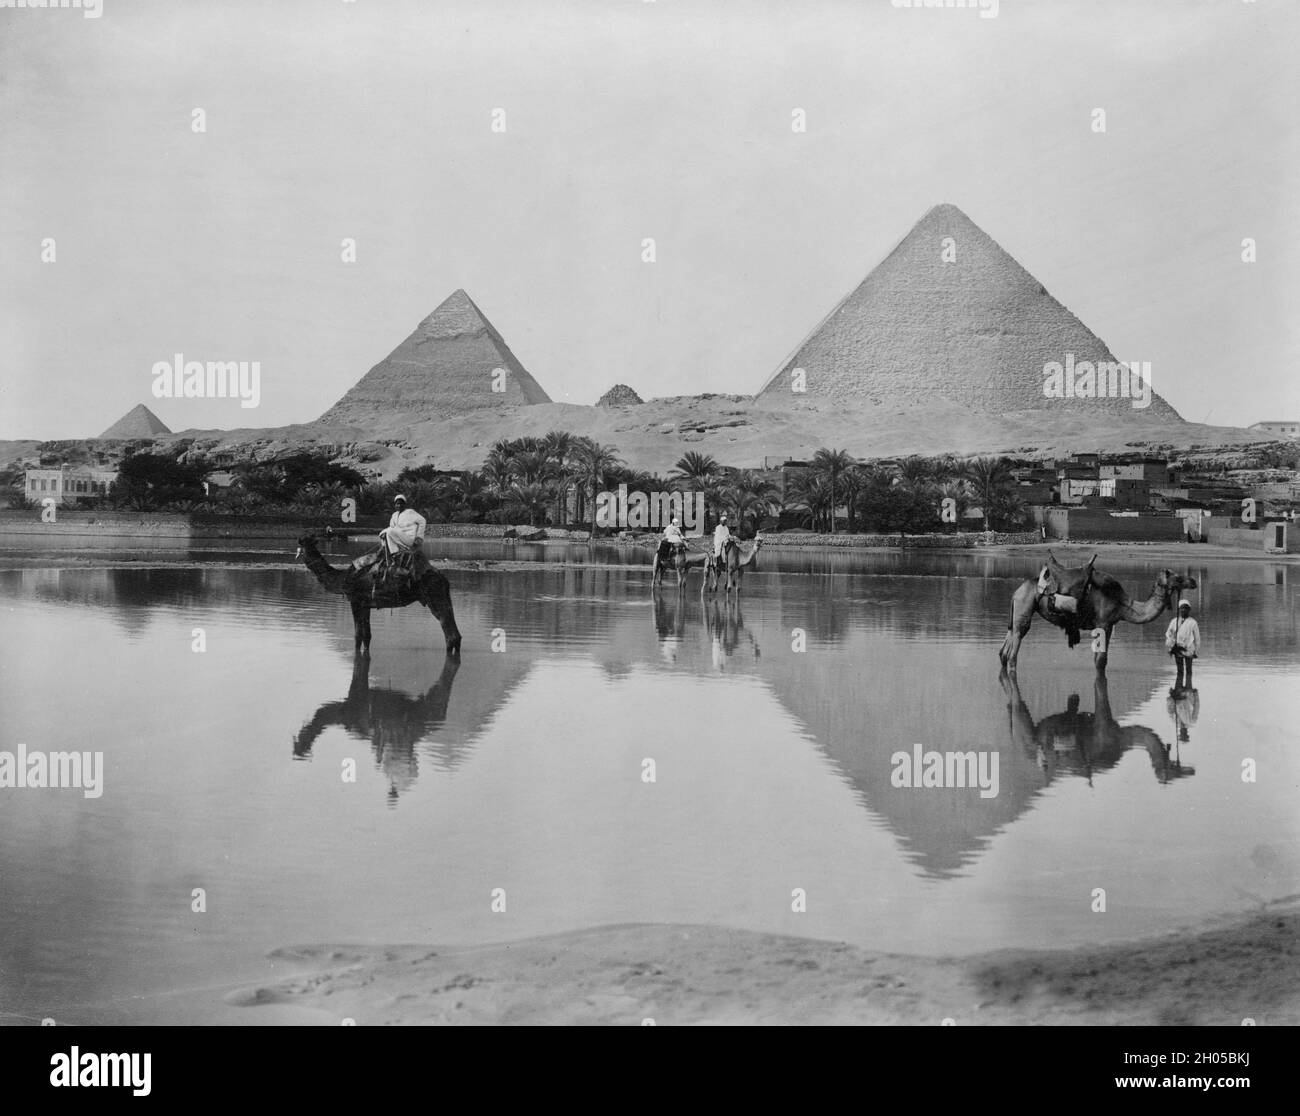 A vintage photo circa 1880 of pyramids on the Giza Plateau in Egypt. It includes the Great Pyramid of Giza, the Pyramid of Khafre, and the Pyramid of Menkaure, along with their associated pyramid complexes Stock Photo